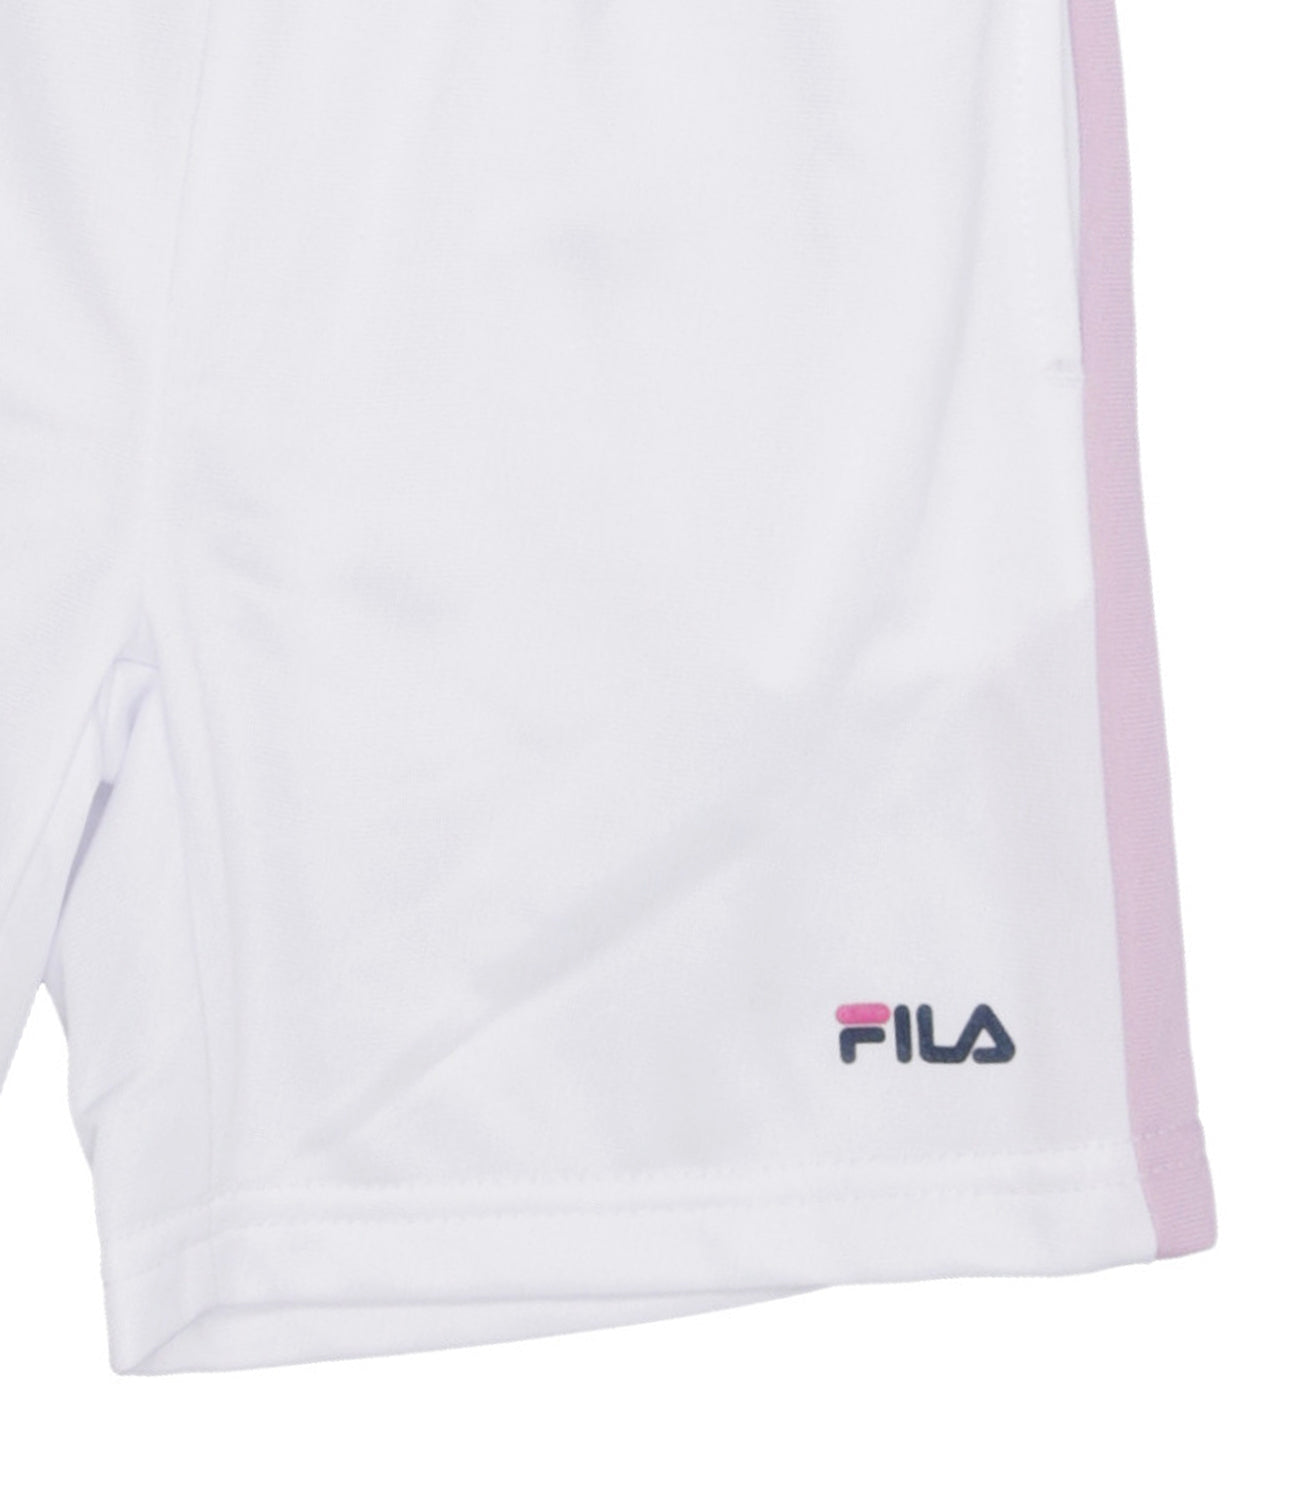 Fila Kids | Shorts Bialogard White and Orchid